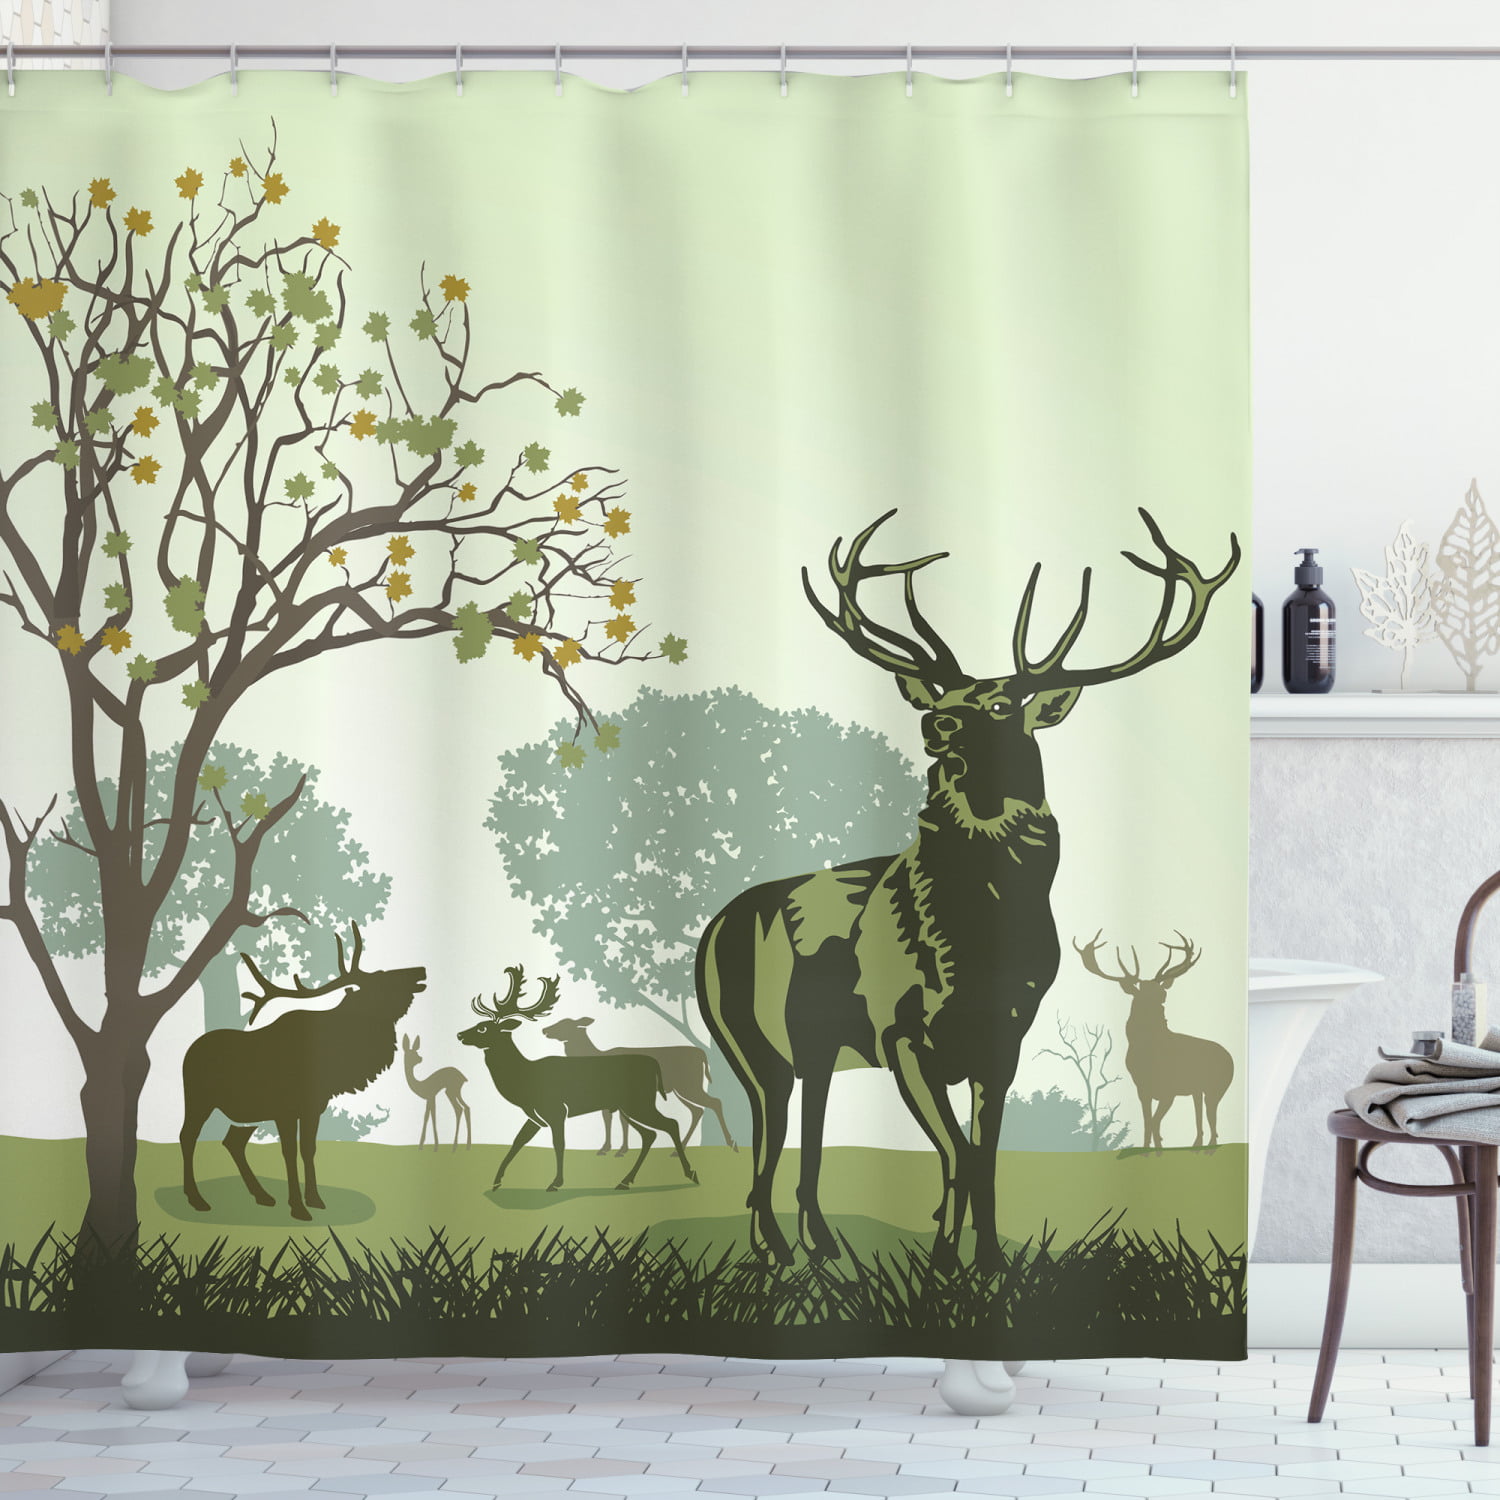 Autumn Forest Deer Shower Curtain Liner Polyester Fabric Bathroom Accessories 